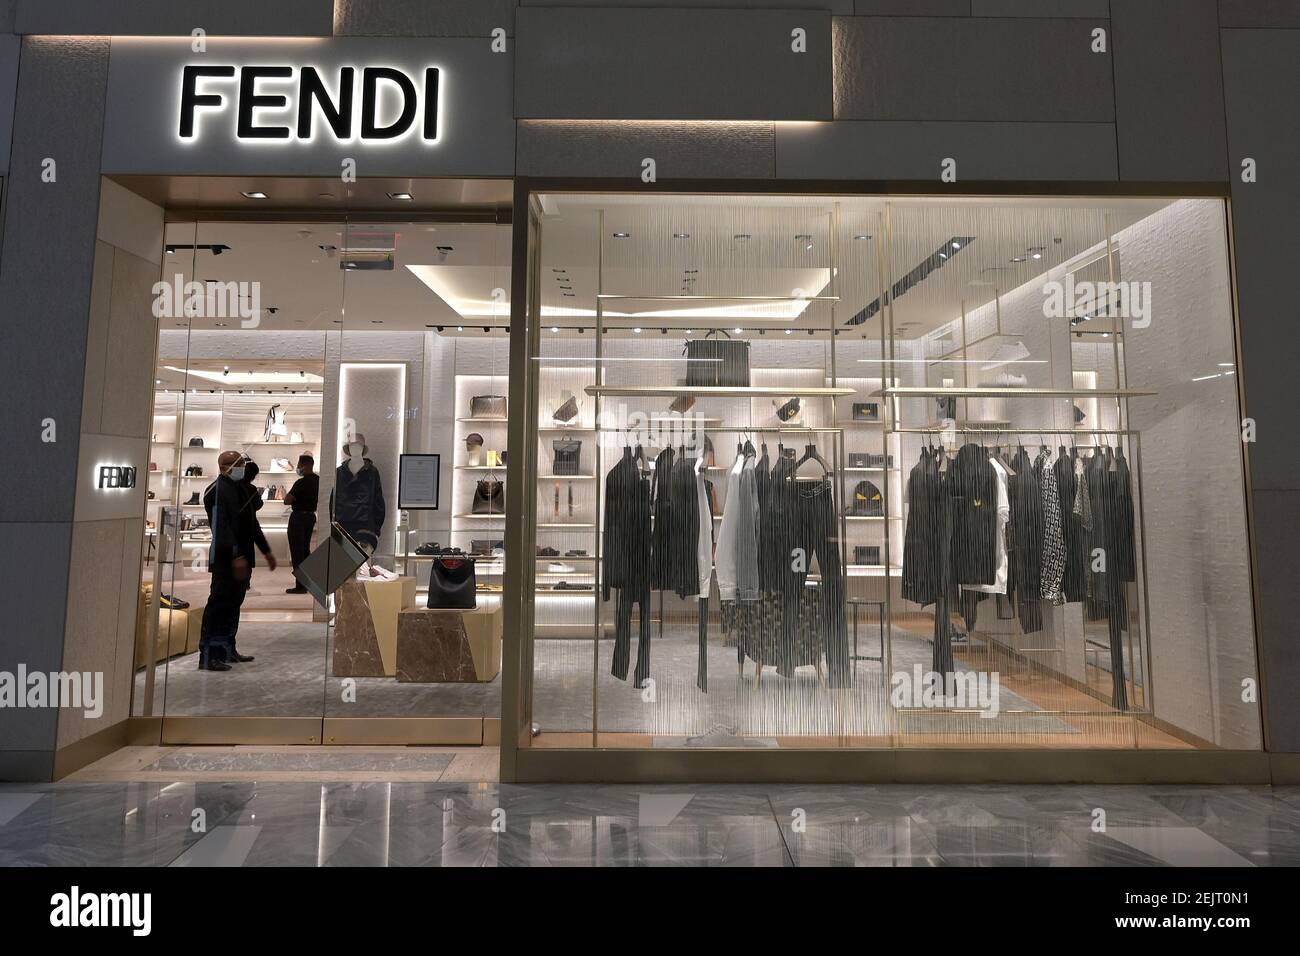 Italian luxury fashion house Fendi retail store at The Shops inside Yards in New York, NY, February 22, 2021. British and Fashion Week shows are underway in Europe this week. (